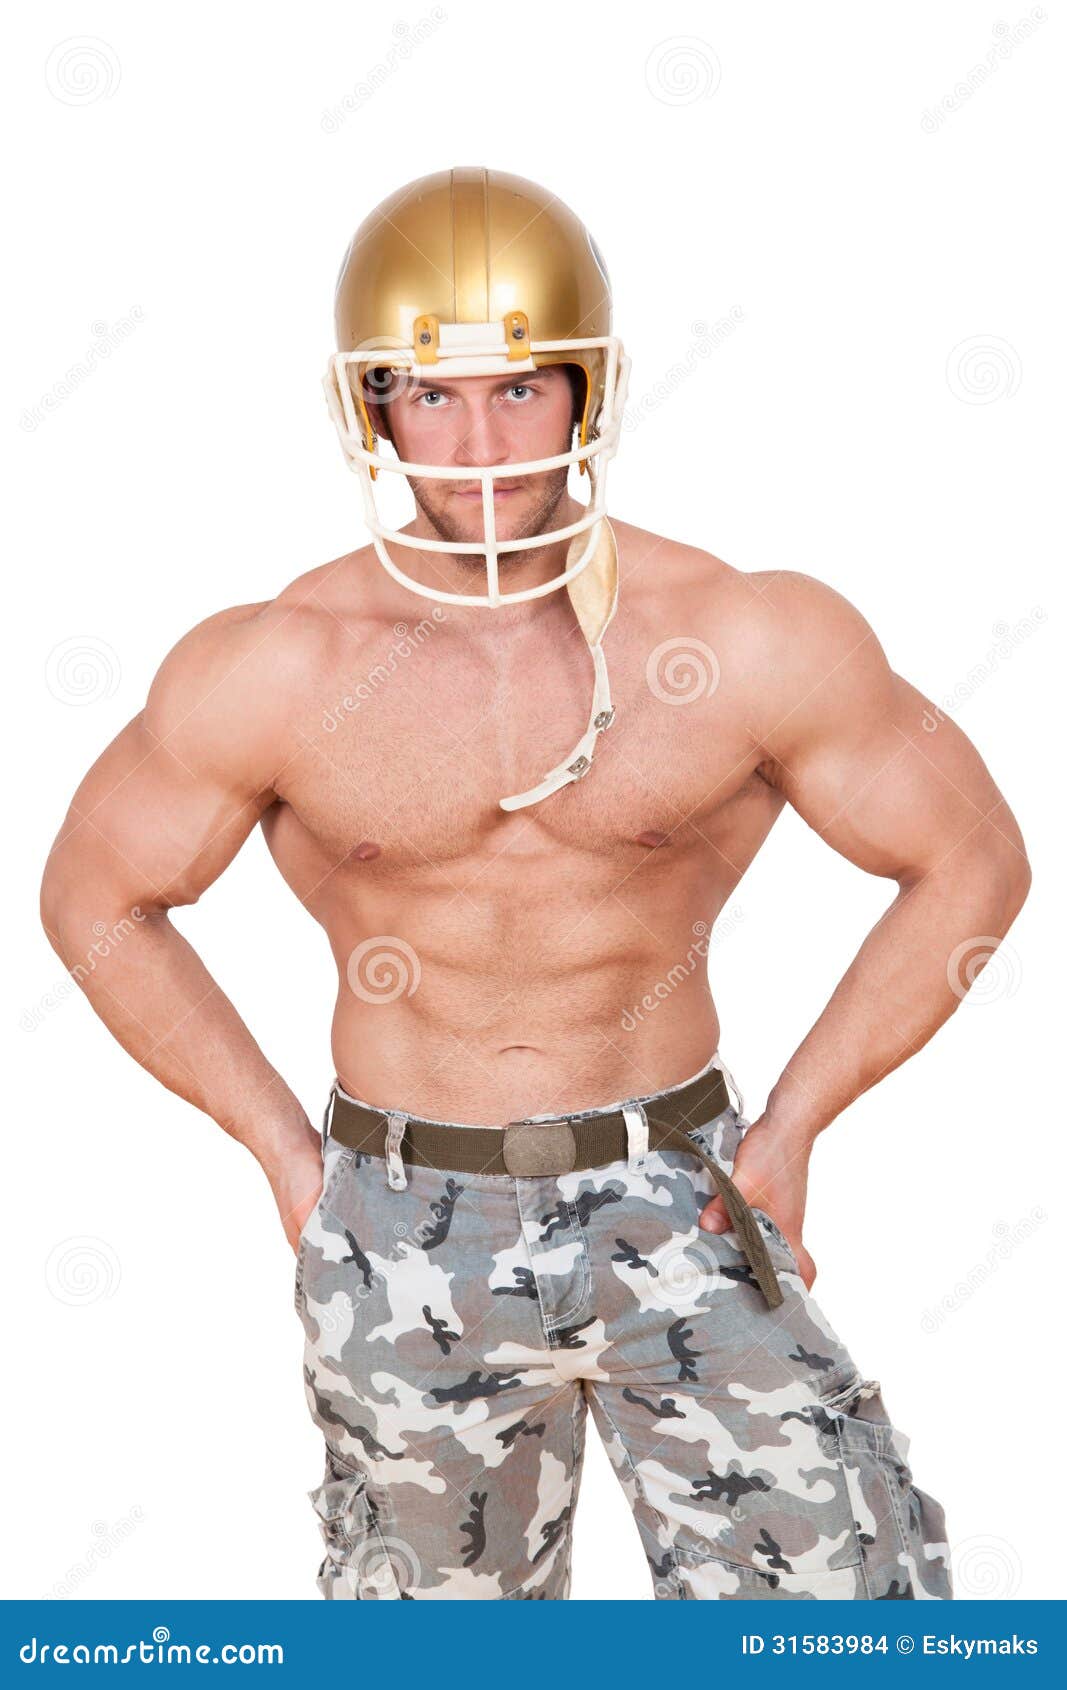 American Football Player Isolated. Stock Images - Image: 31583984